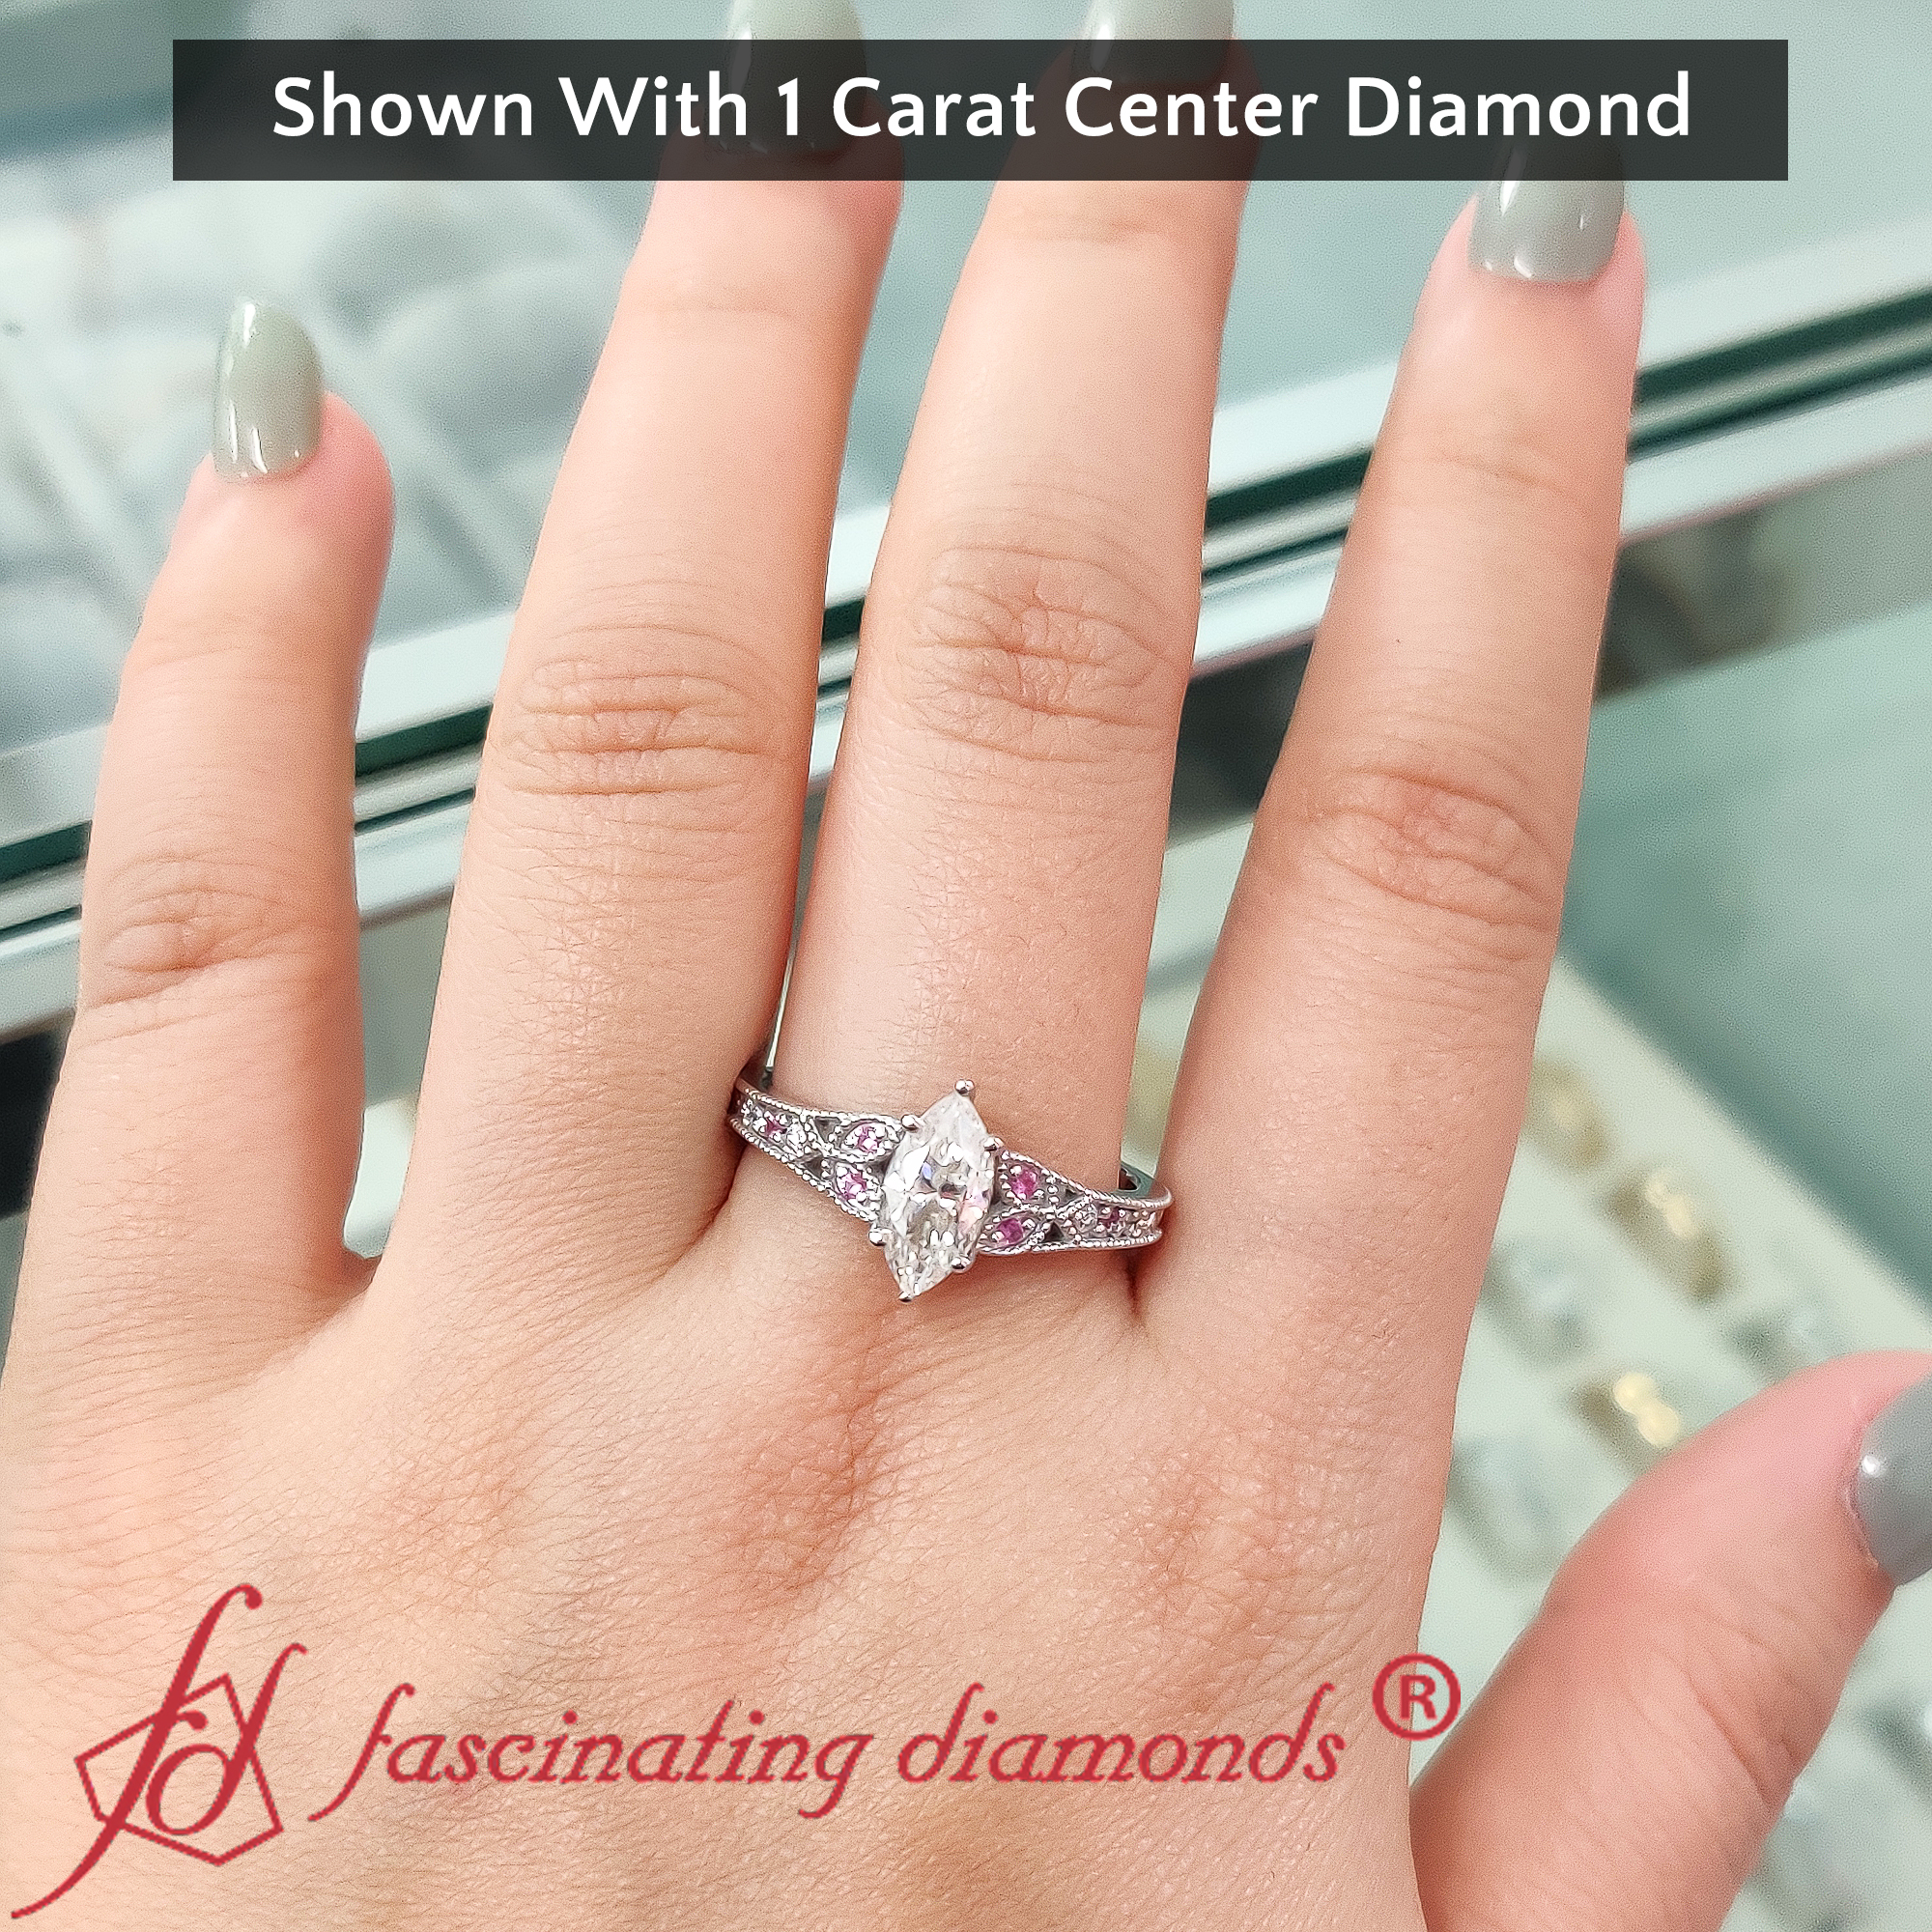 News Round Up: 16 Carat Diamonds, A $10 Million Dollar Engagement Ring &  More! | Sparkly - Find Your Ringspiration